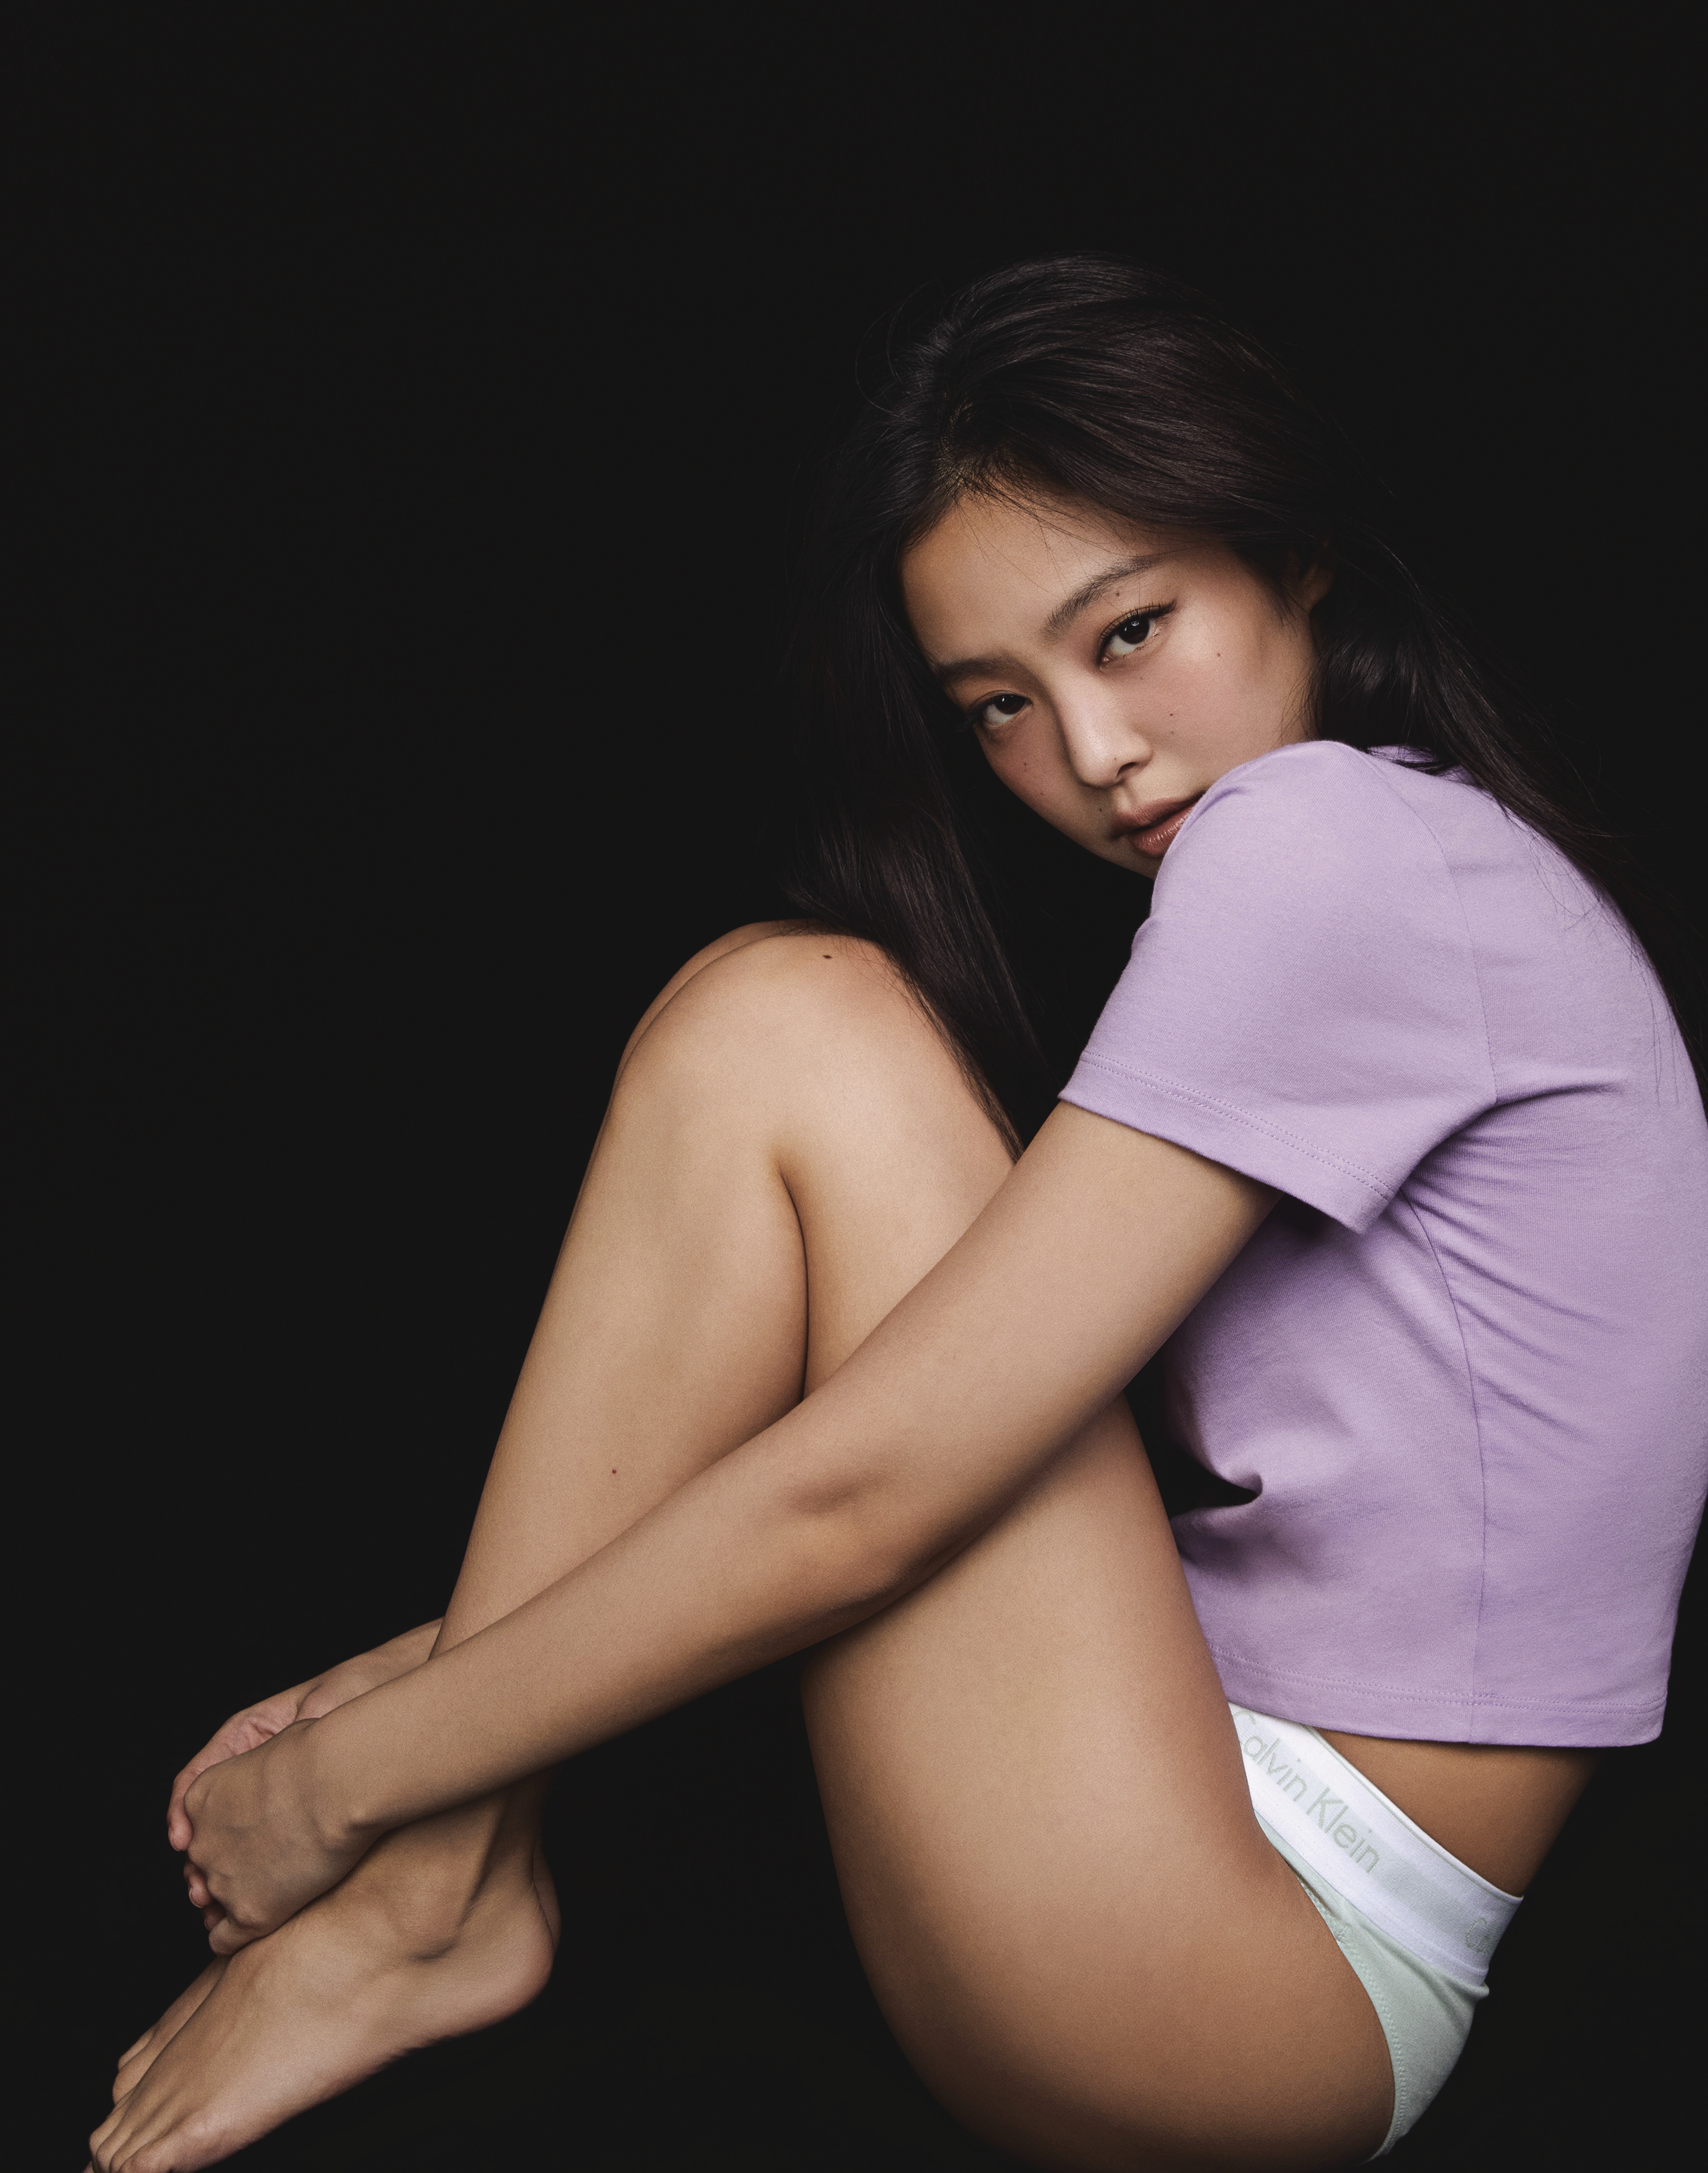 Jennie wearing her Calvin Klein capsule collection